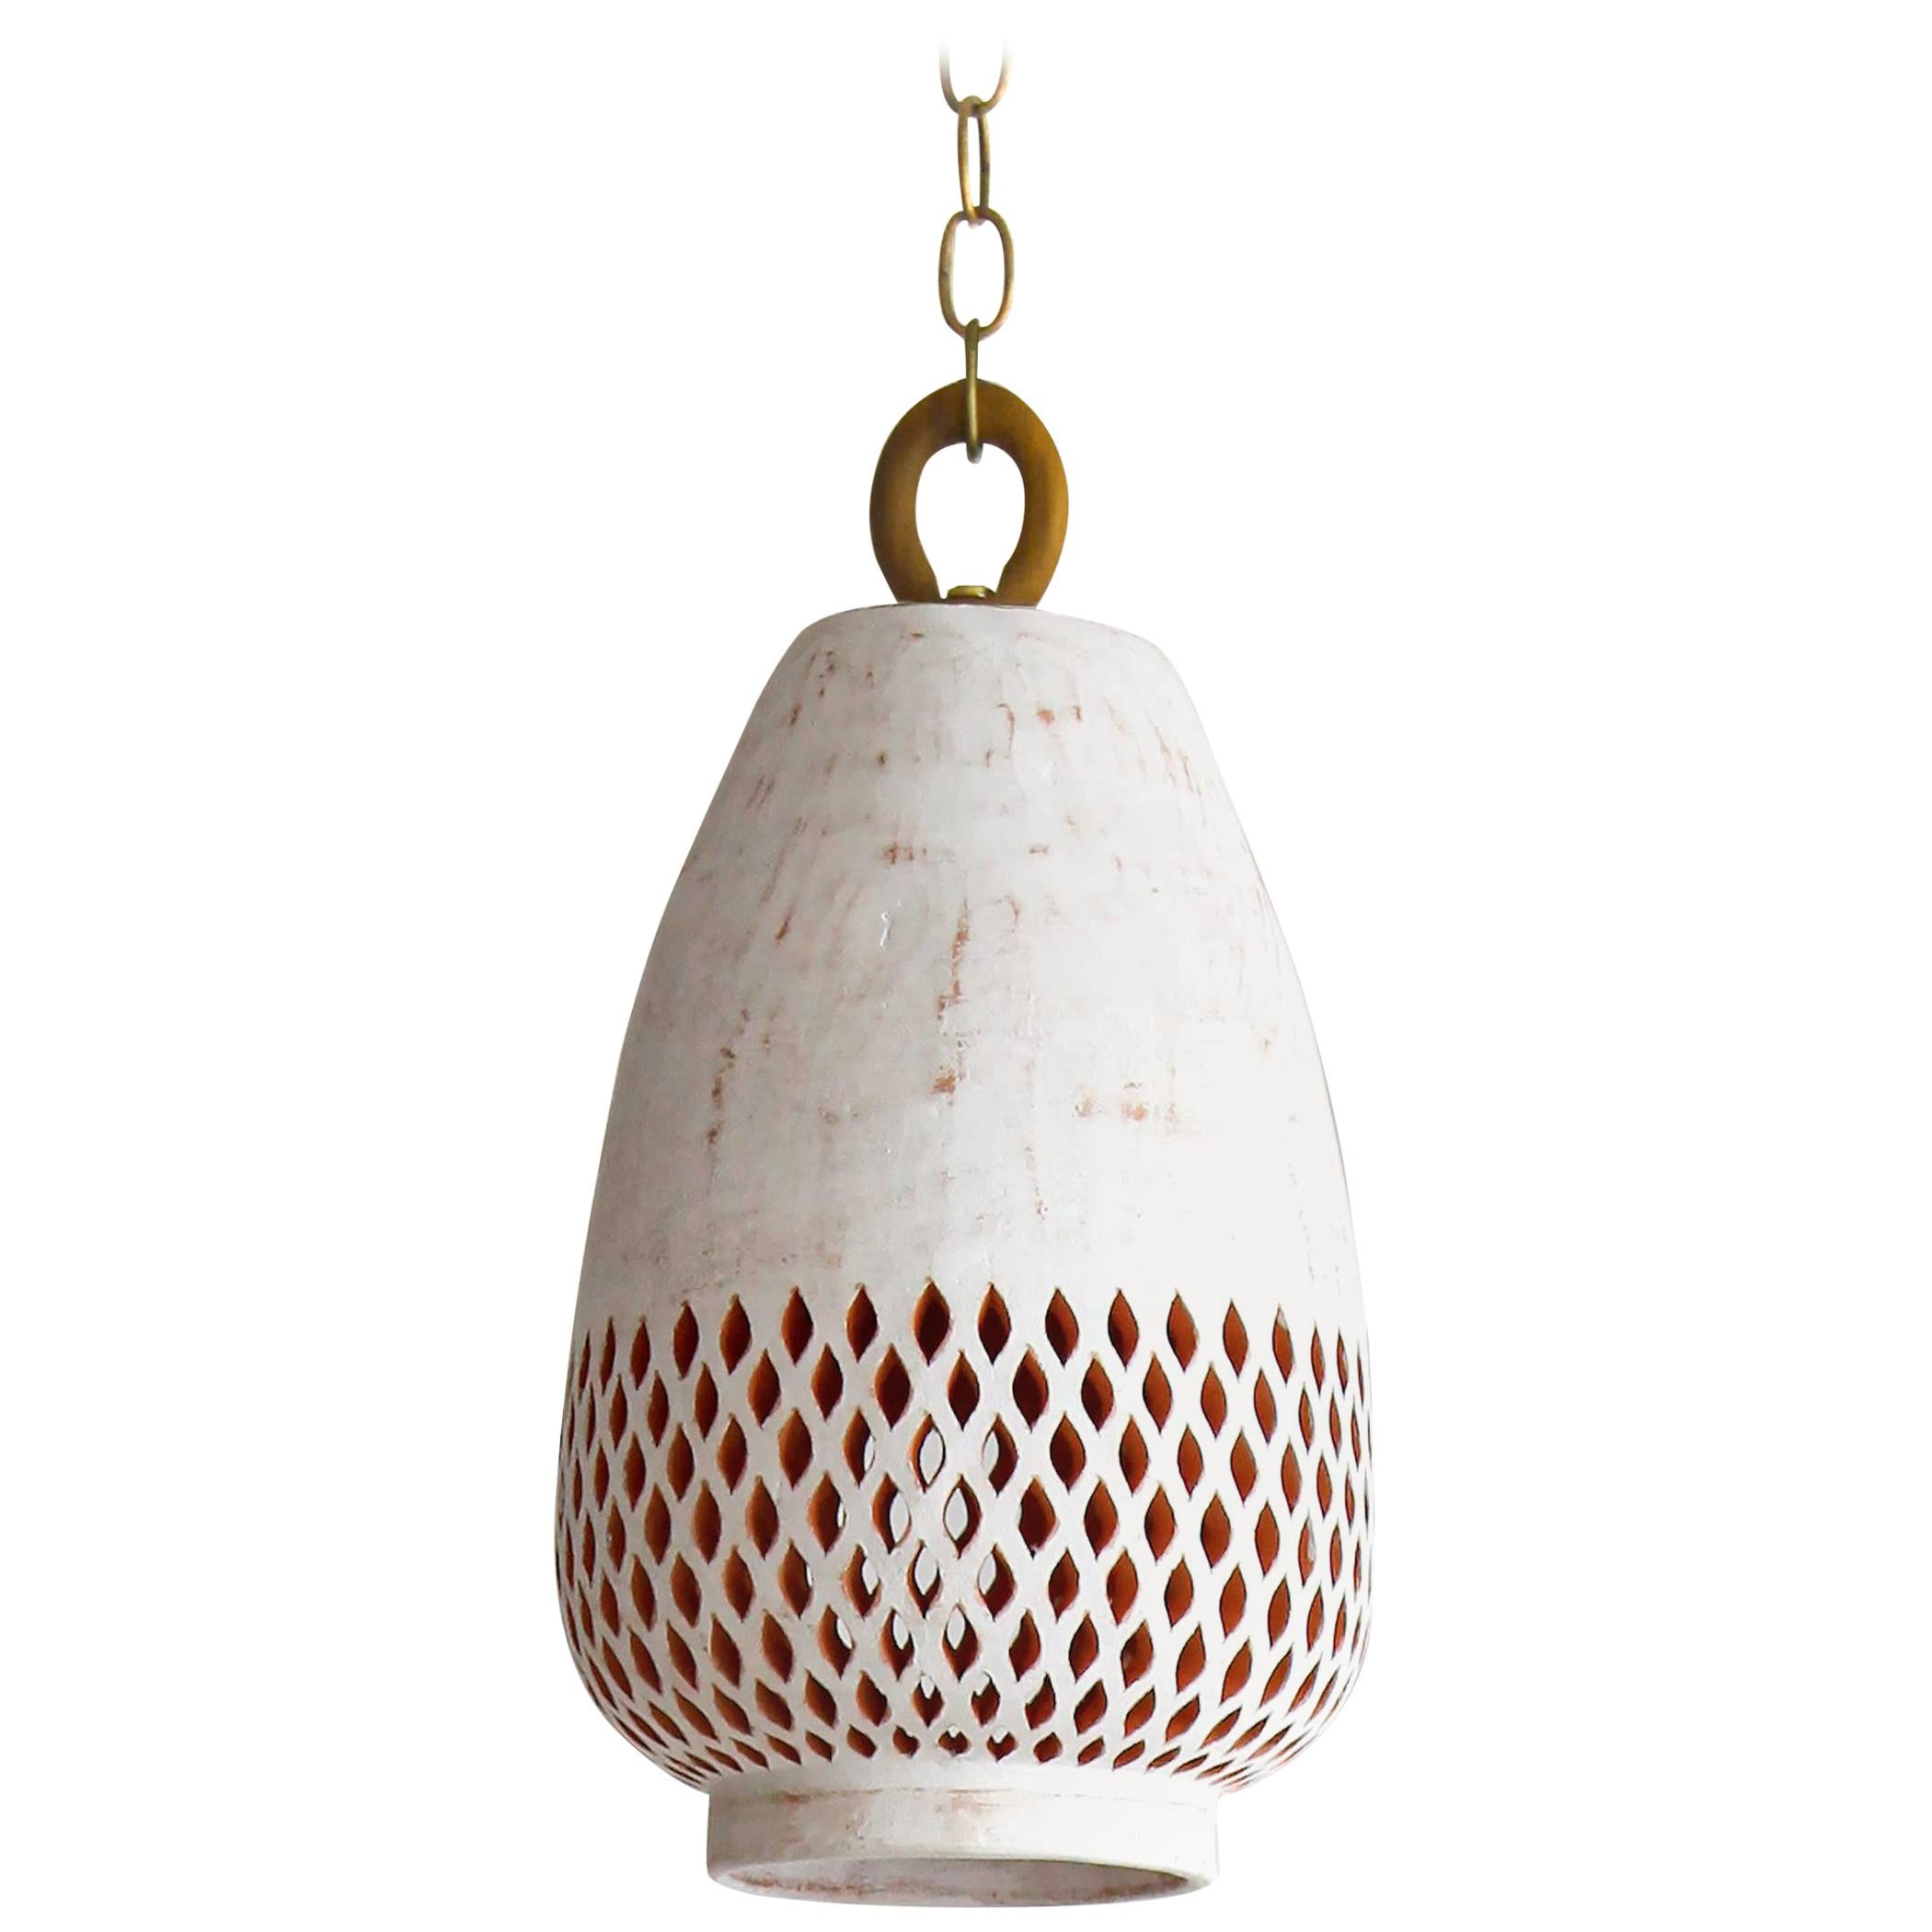 Small White Ceramic Pendant Light, Brushed Brass, Diamantes Atzompa Collection For Sale